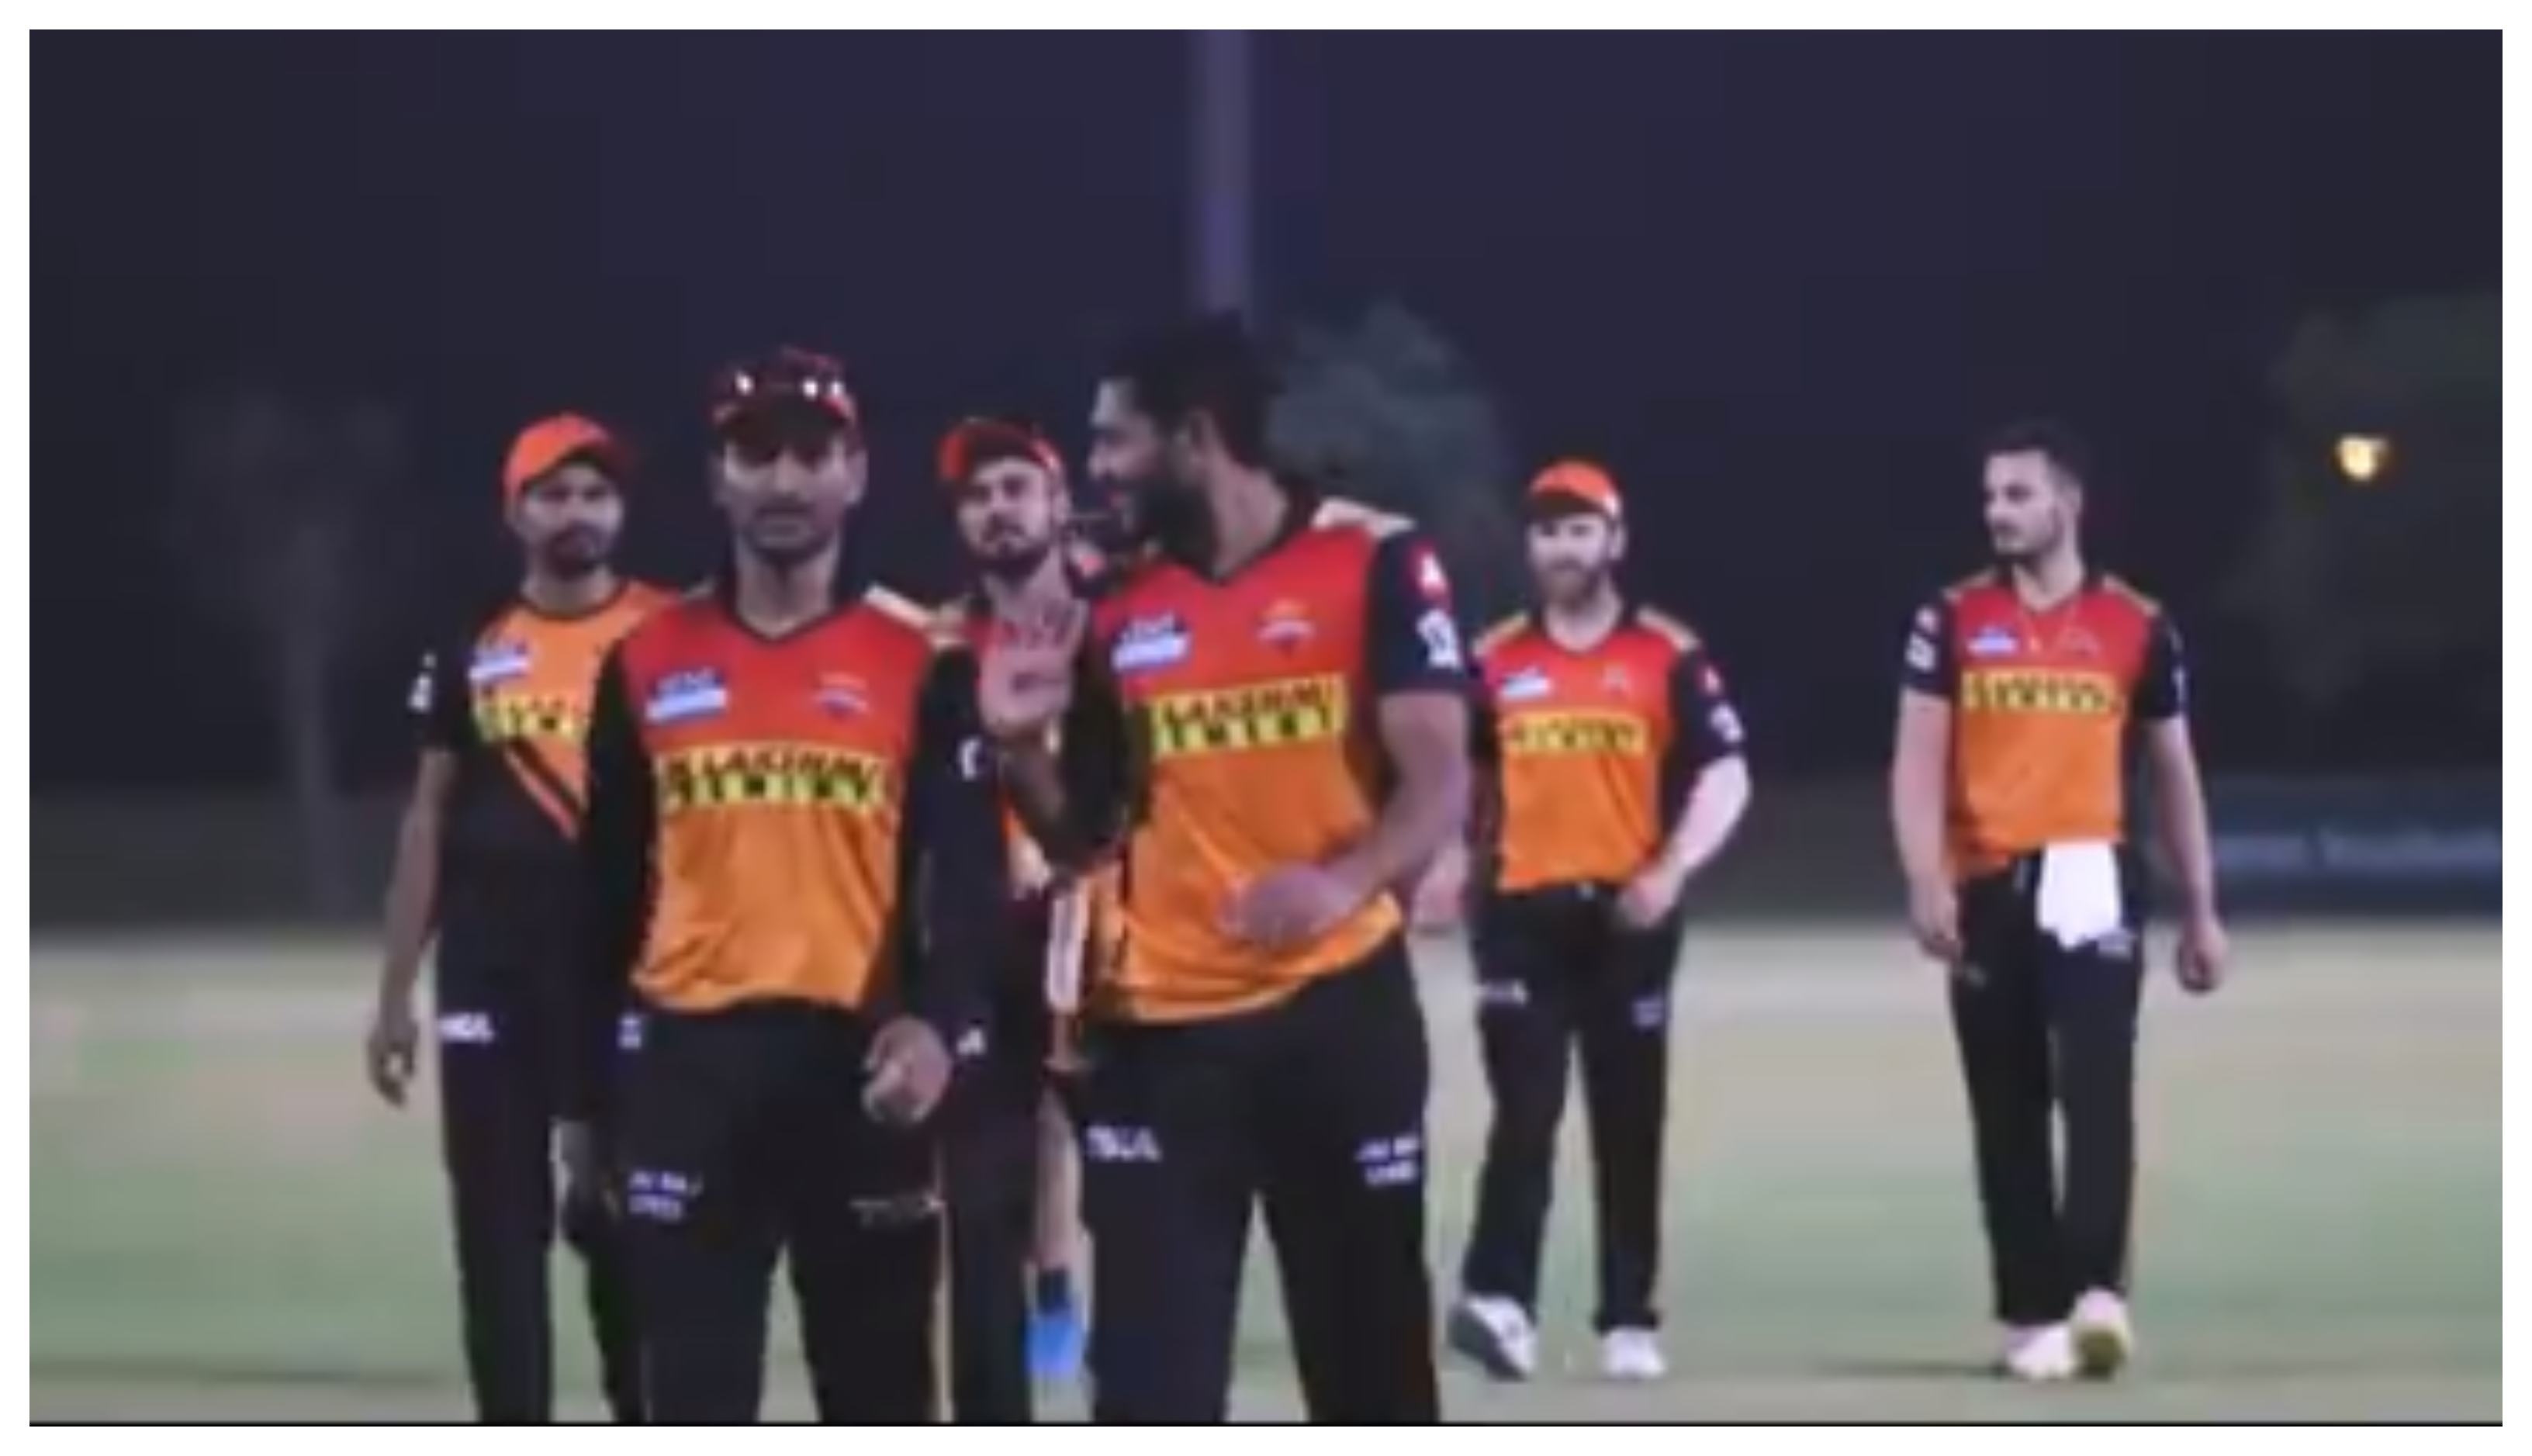 SRH played an intra-squad practice match ahead of IPL 2021 | SRH/Twitter